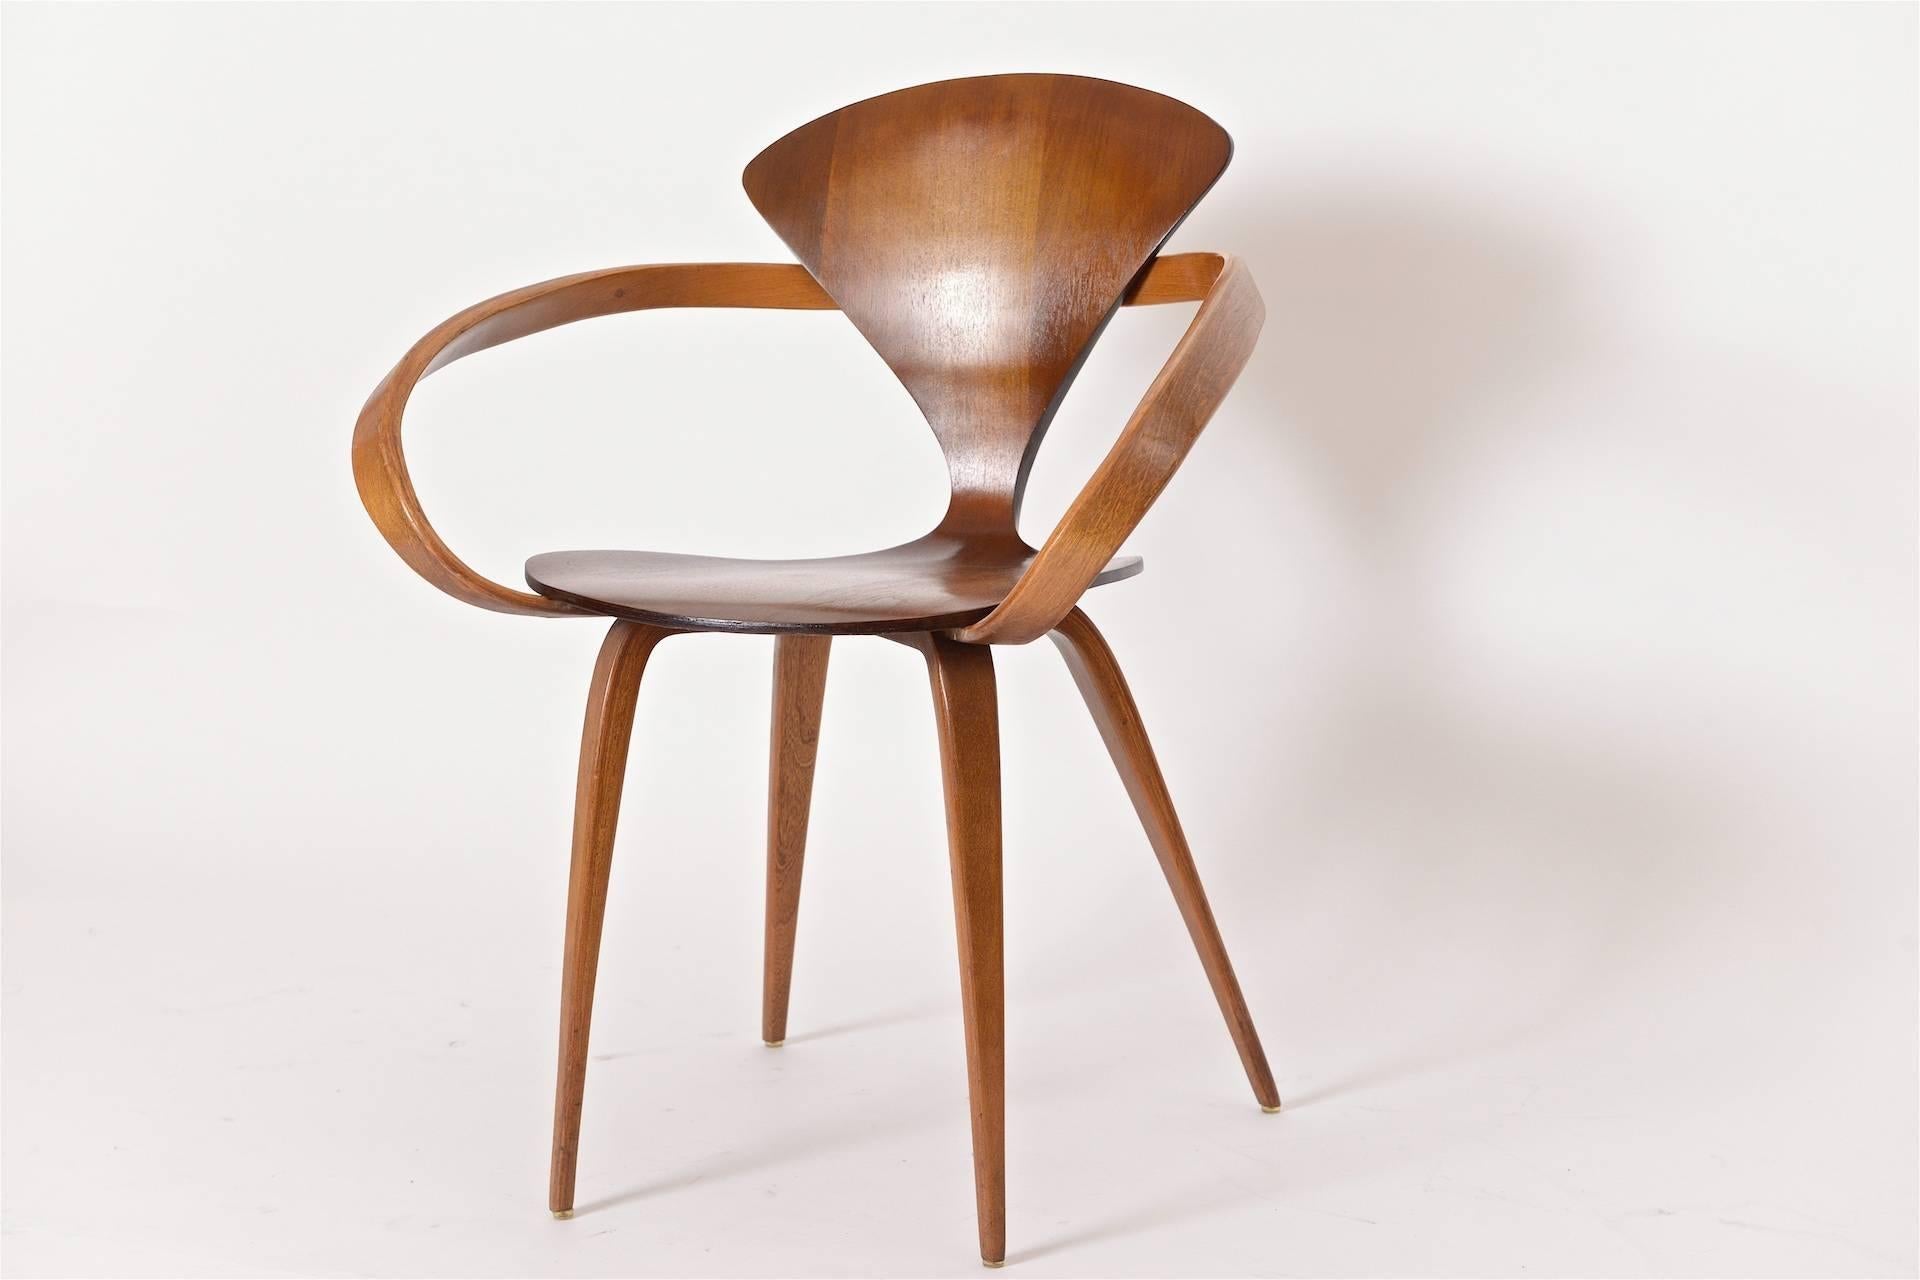 A beautifully curvaceous walnut armchair by American designer, Norman Cherner. The Cherner Chair was originally designed in 1957 and produced by a Massachusetts based company, Plycraft. This model is a rare, early version from that same company. In